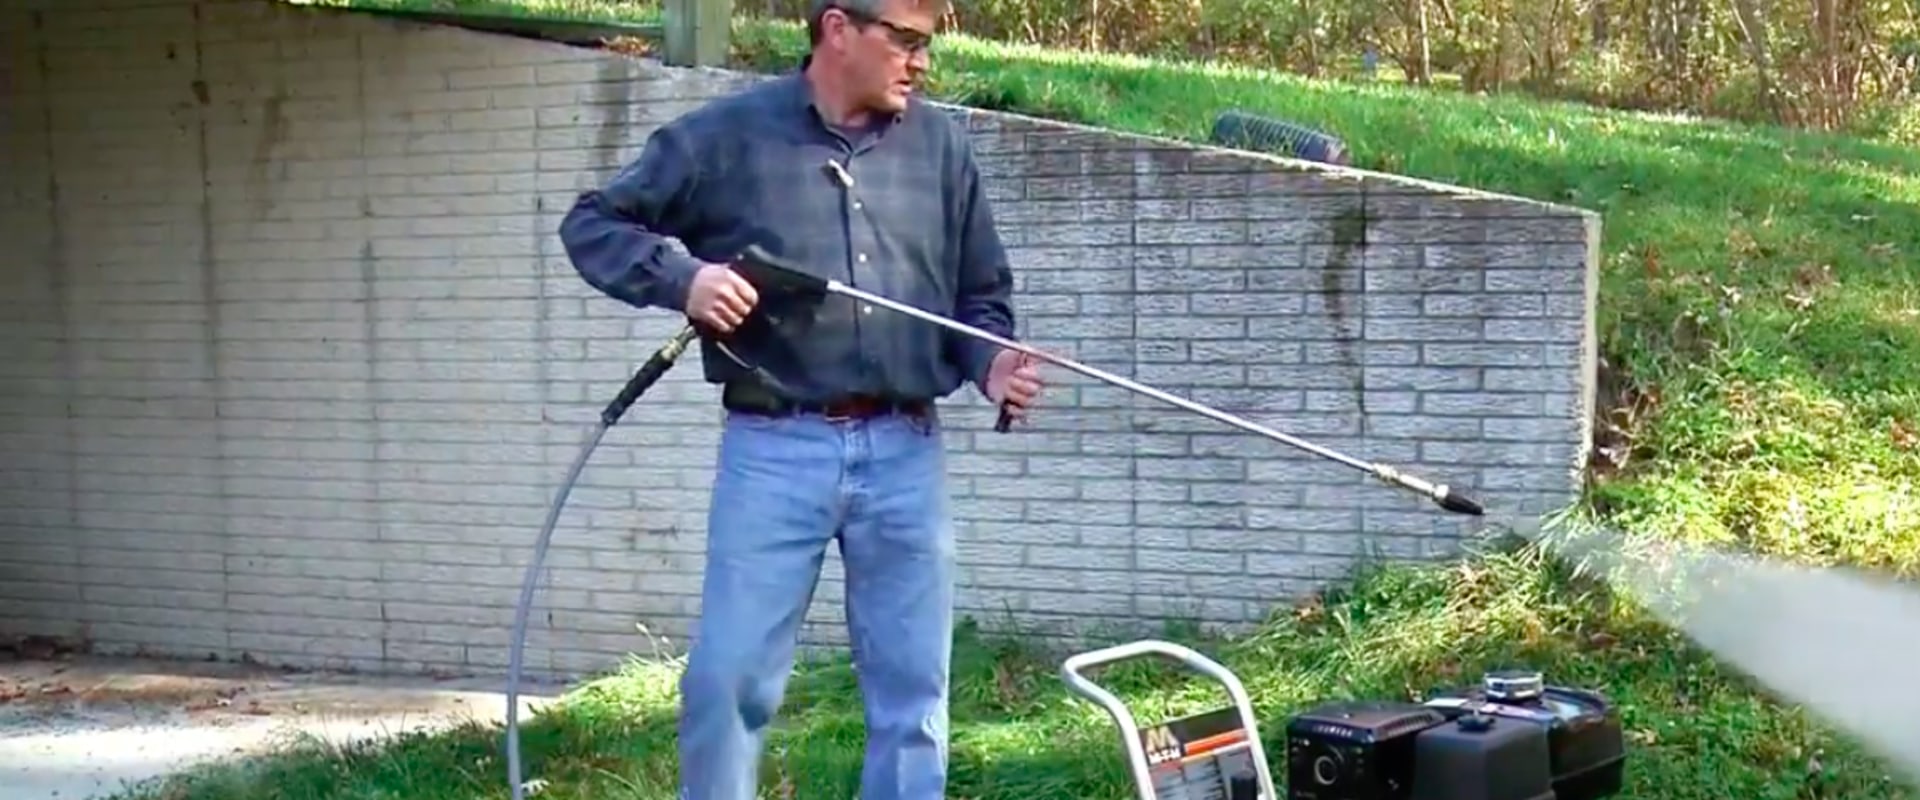 What are the safety guidelines for pressure washers?